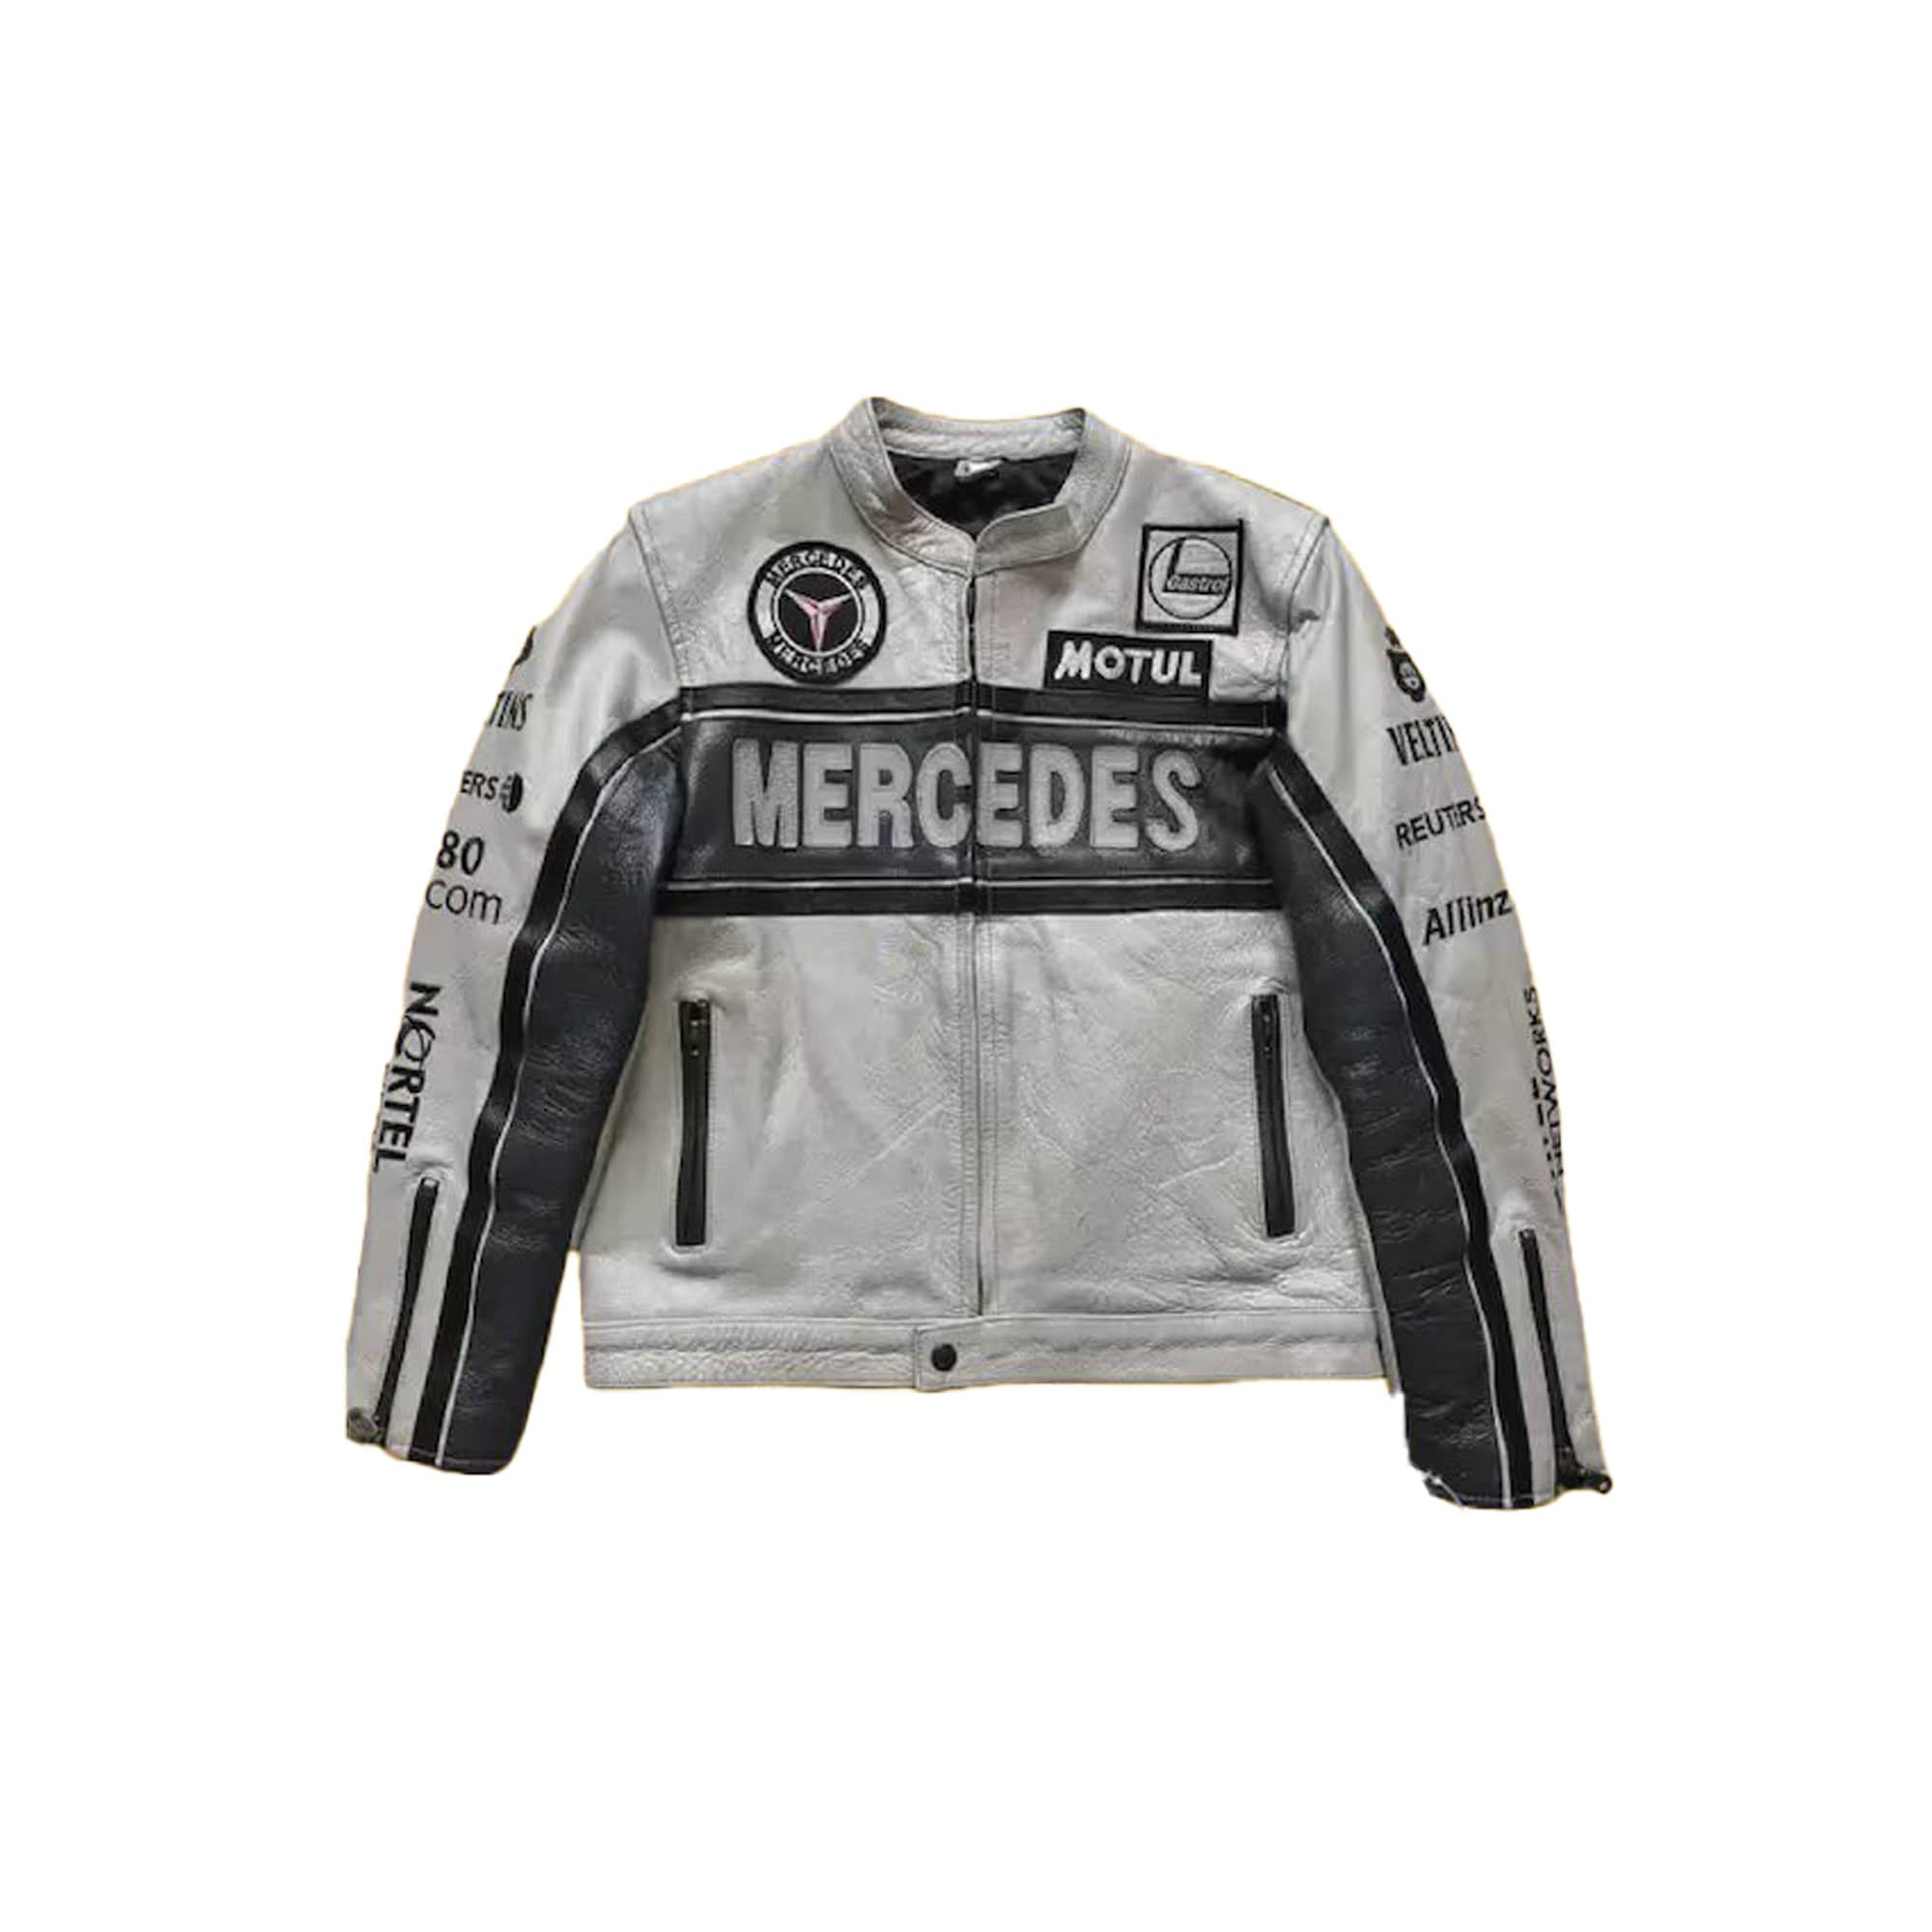 Logo Mercedes embroidered on Quilted Jacket Blouson Parka Giacca Chaqueta  Veste